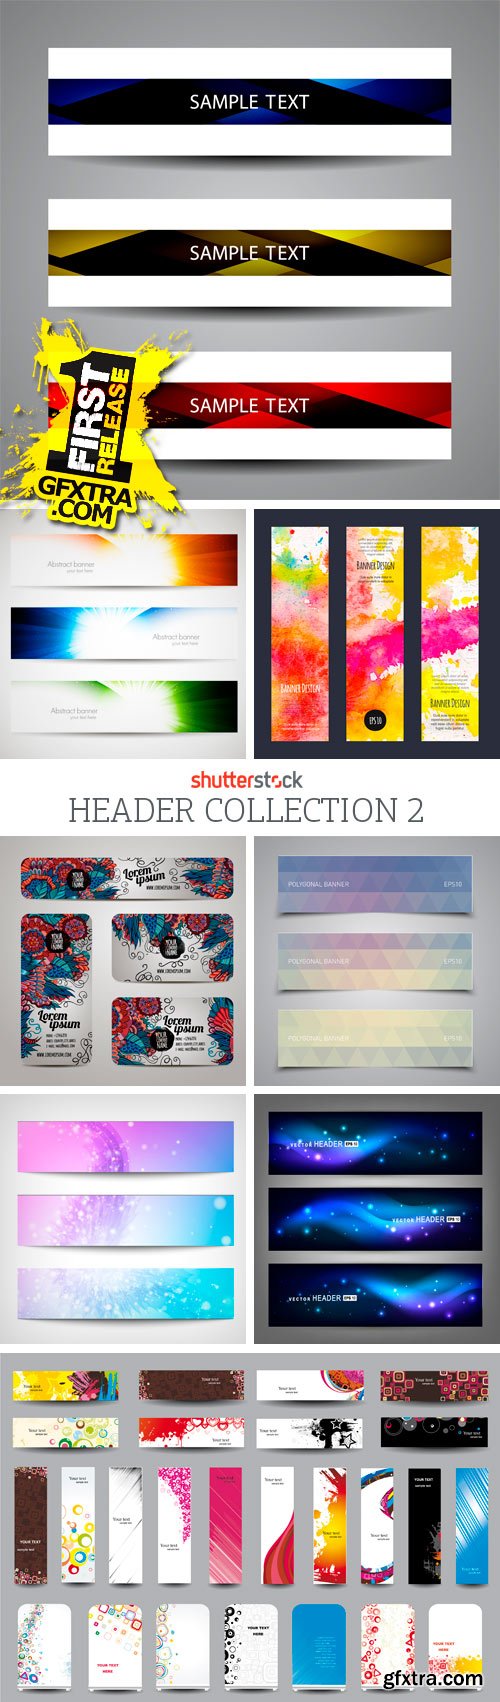 Amazing SS - Header Collection 2, 25xEPS